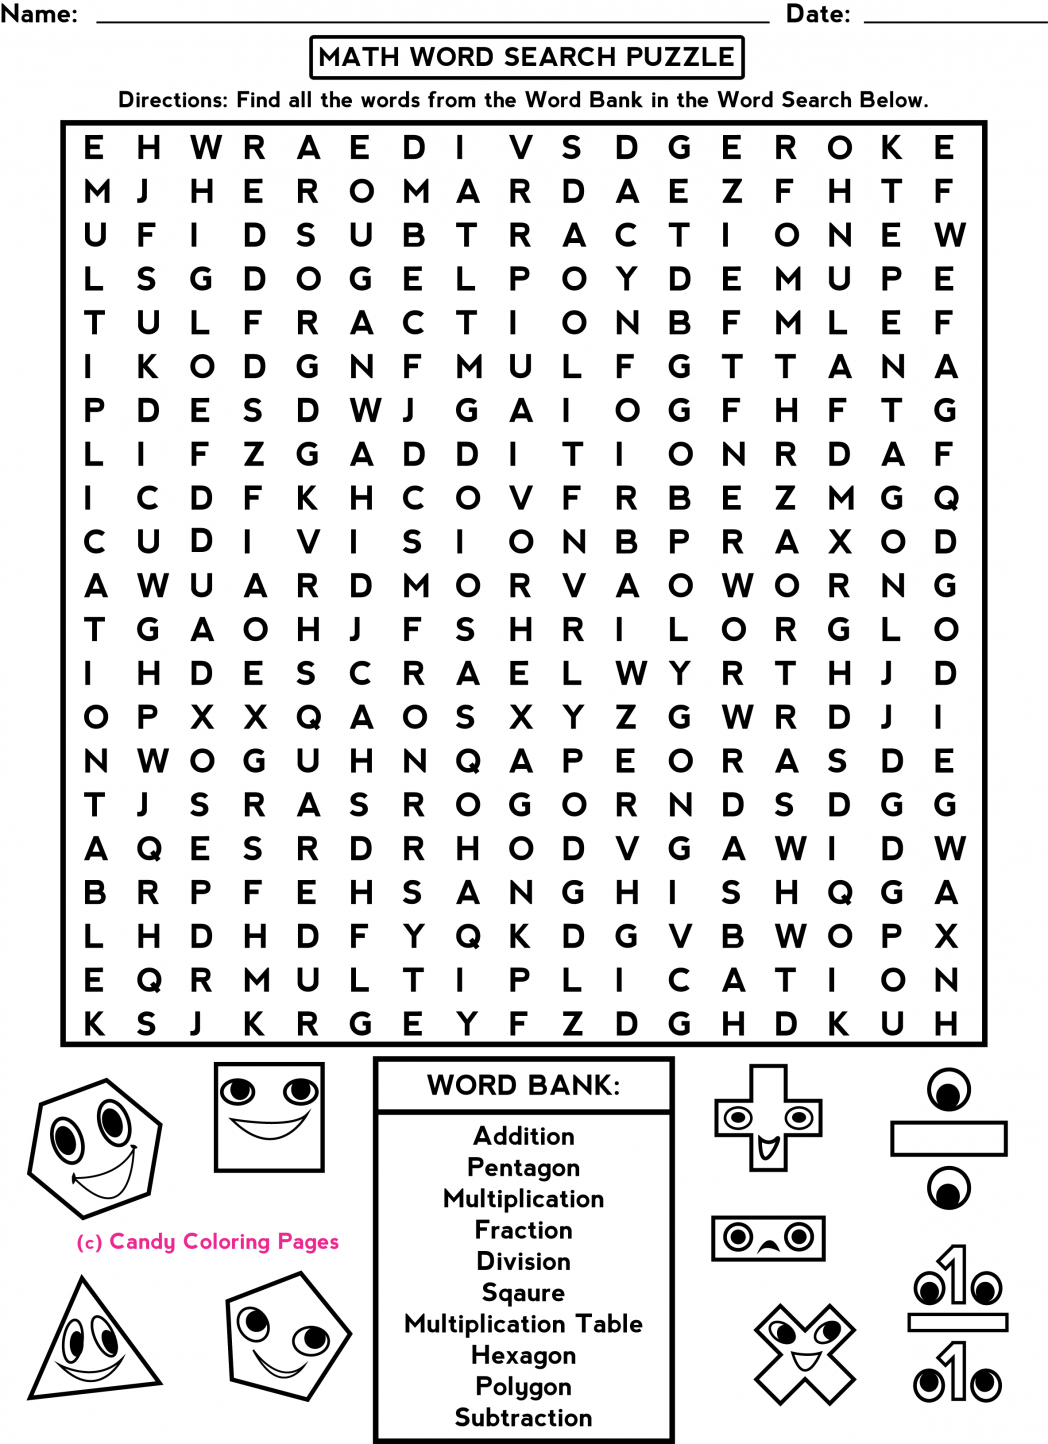 printable-crossword-puzzles-for-middle-school-students-printable-crossword-puzzles